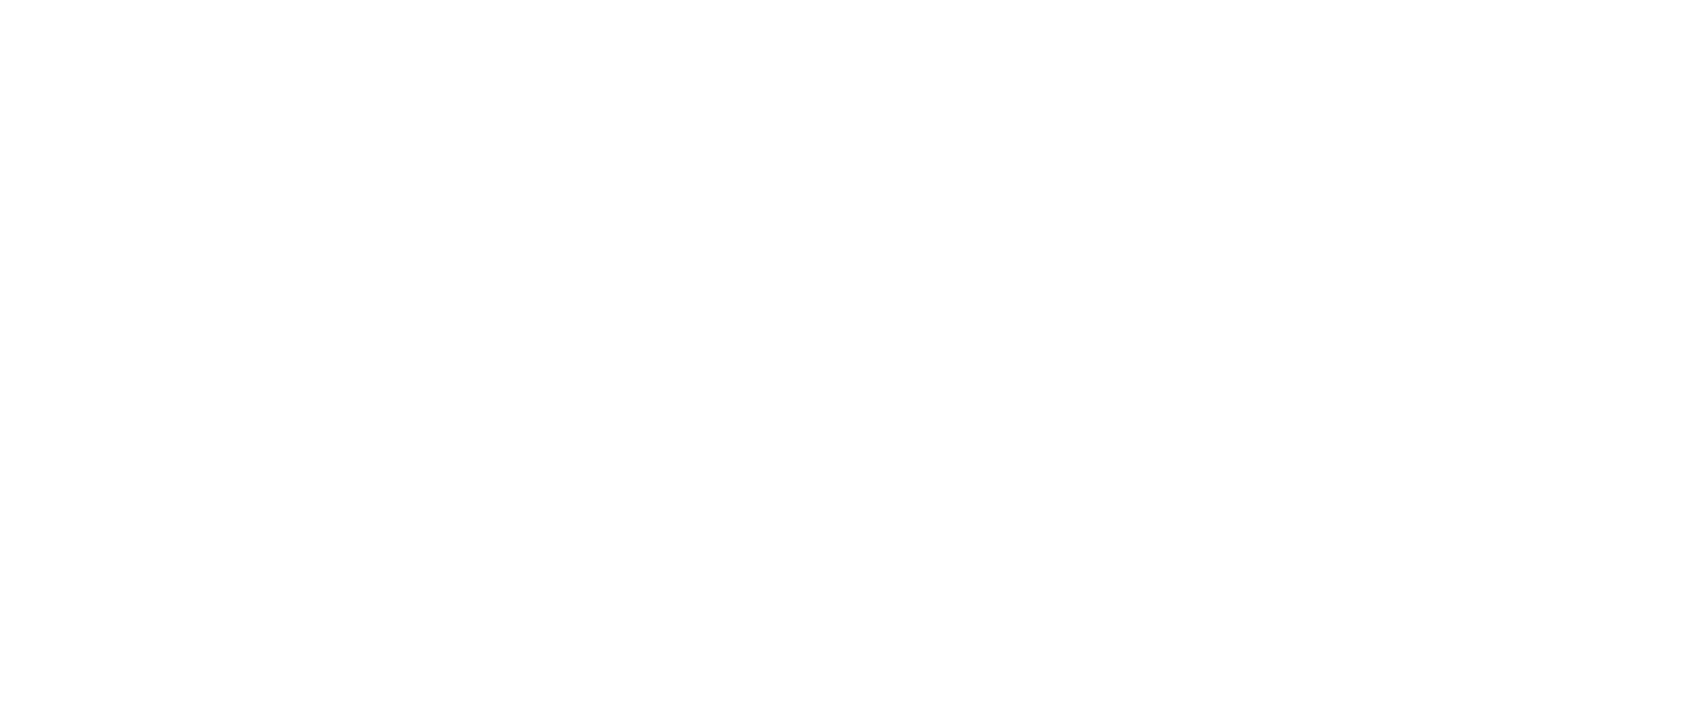 Power Corporation of Canada logo large for dark backgrounds (transparent PNG)